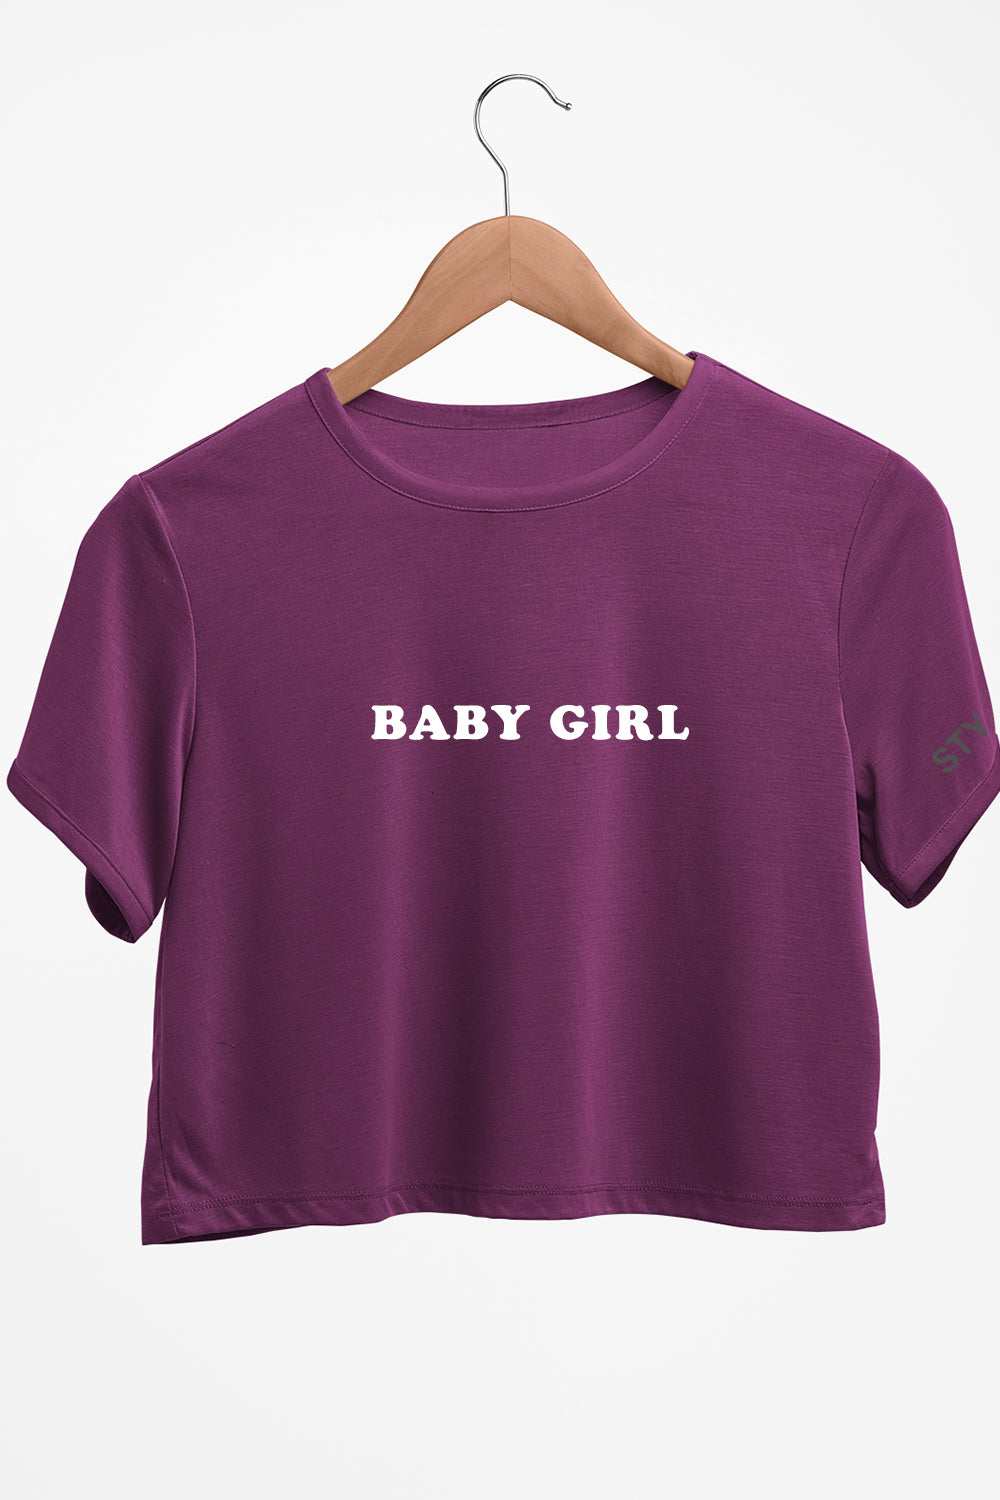 Baby Girl Graphic Printed Purple Crop Top